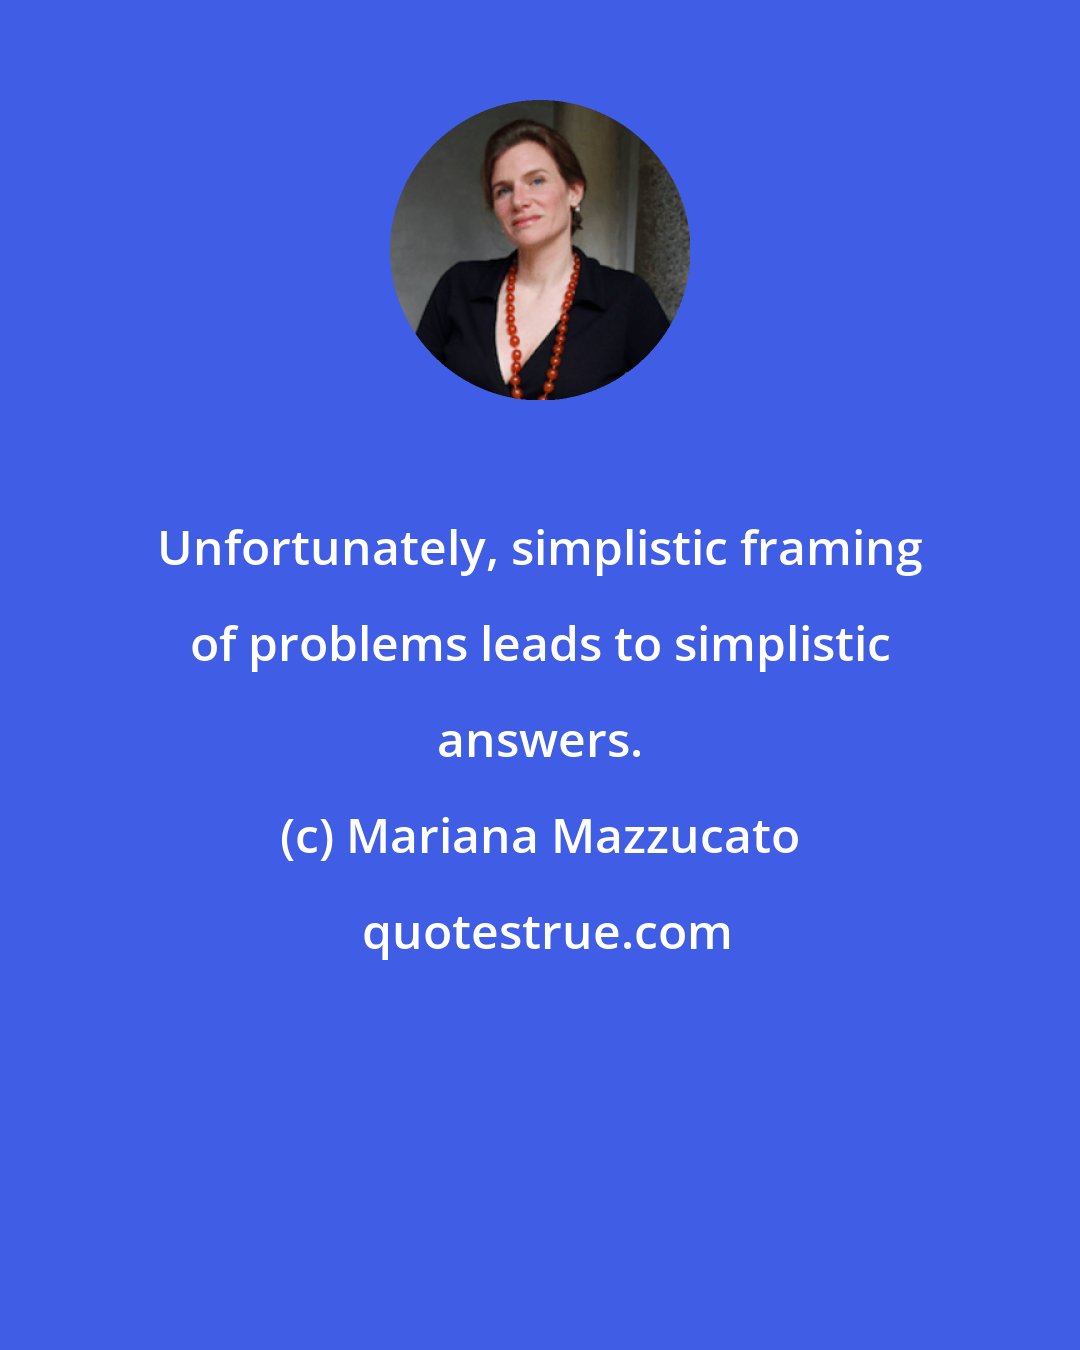 Mariana Mazzucato: Unfortunately, simplistic framing of problems leads to simplistic answers.